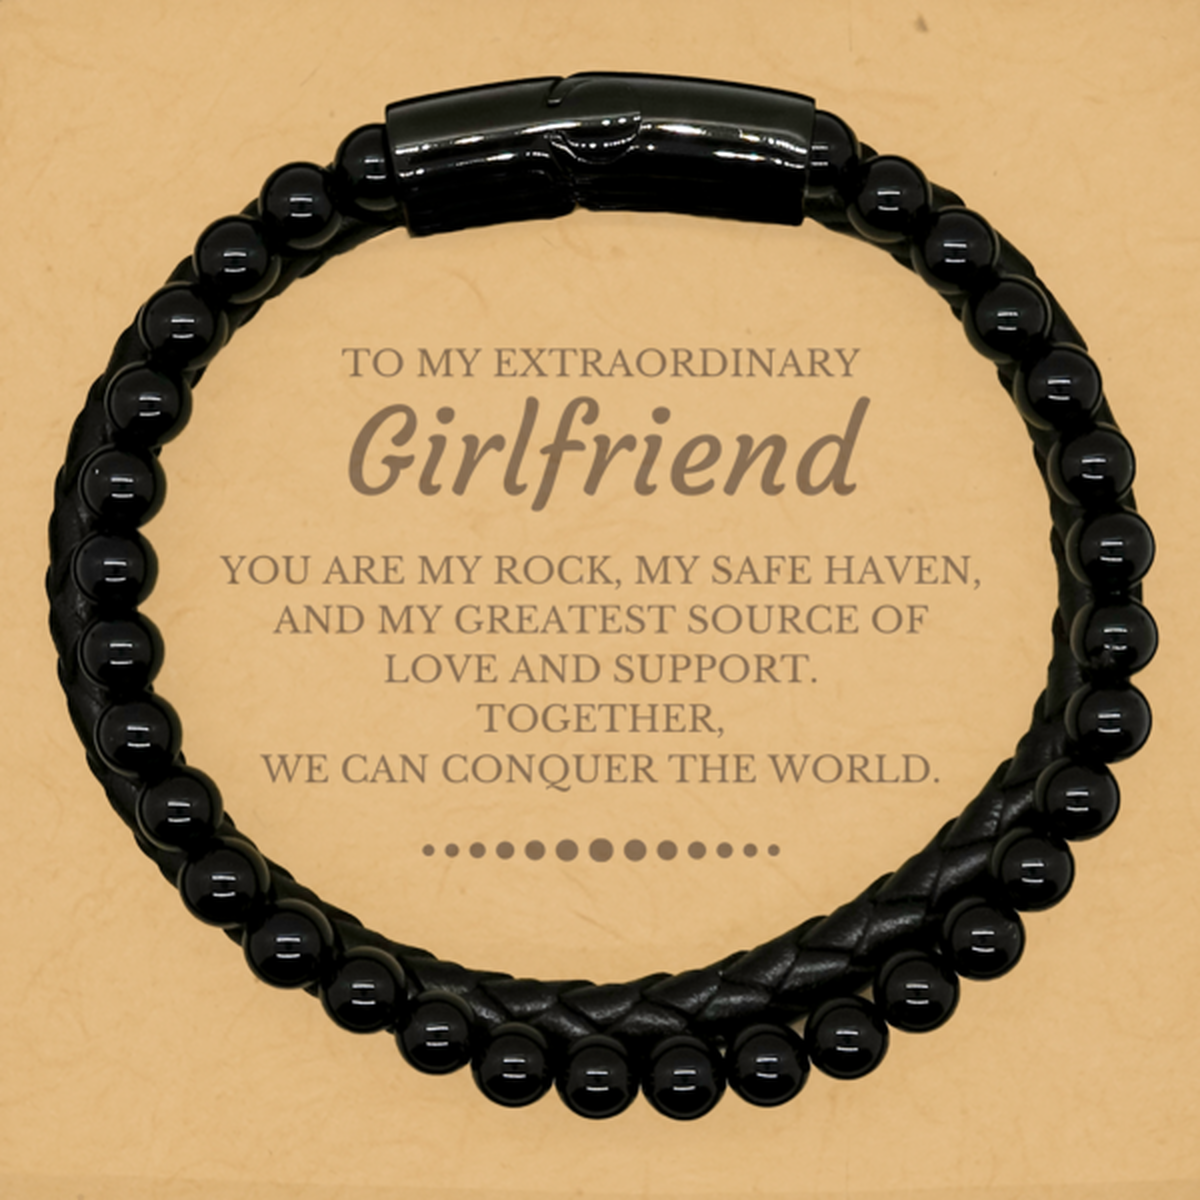 To My Extraordinary Girlfriend Gifts, Together, we can conquer the world, Birthday Stone Leather Bracelets For Girlfriend, Christmas Gifts For Girlfriend